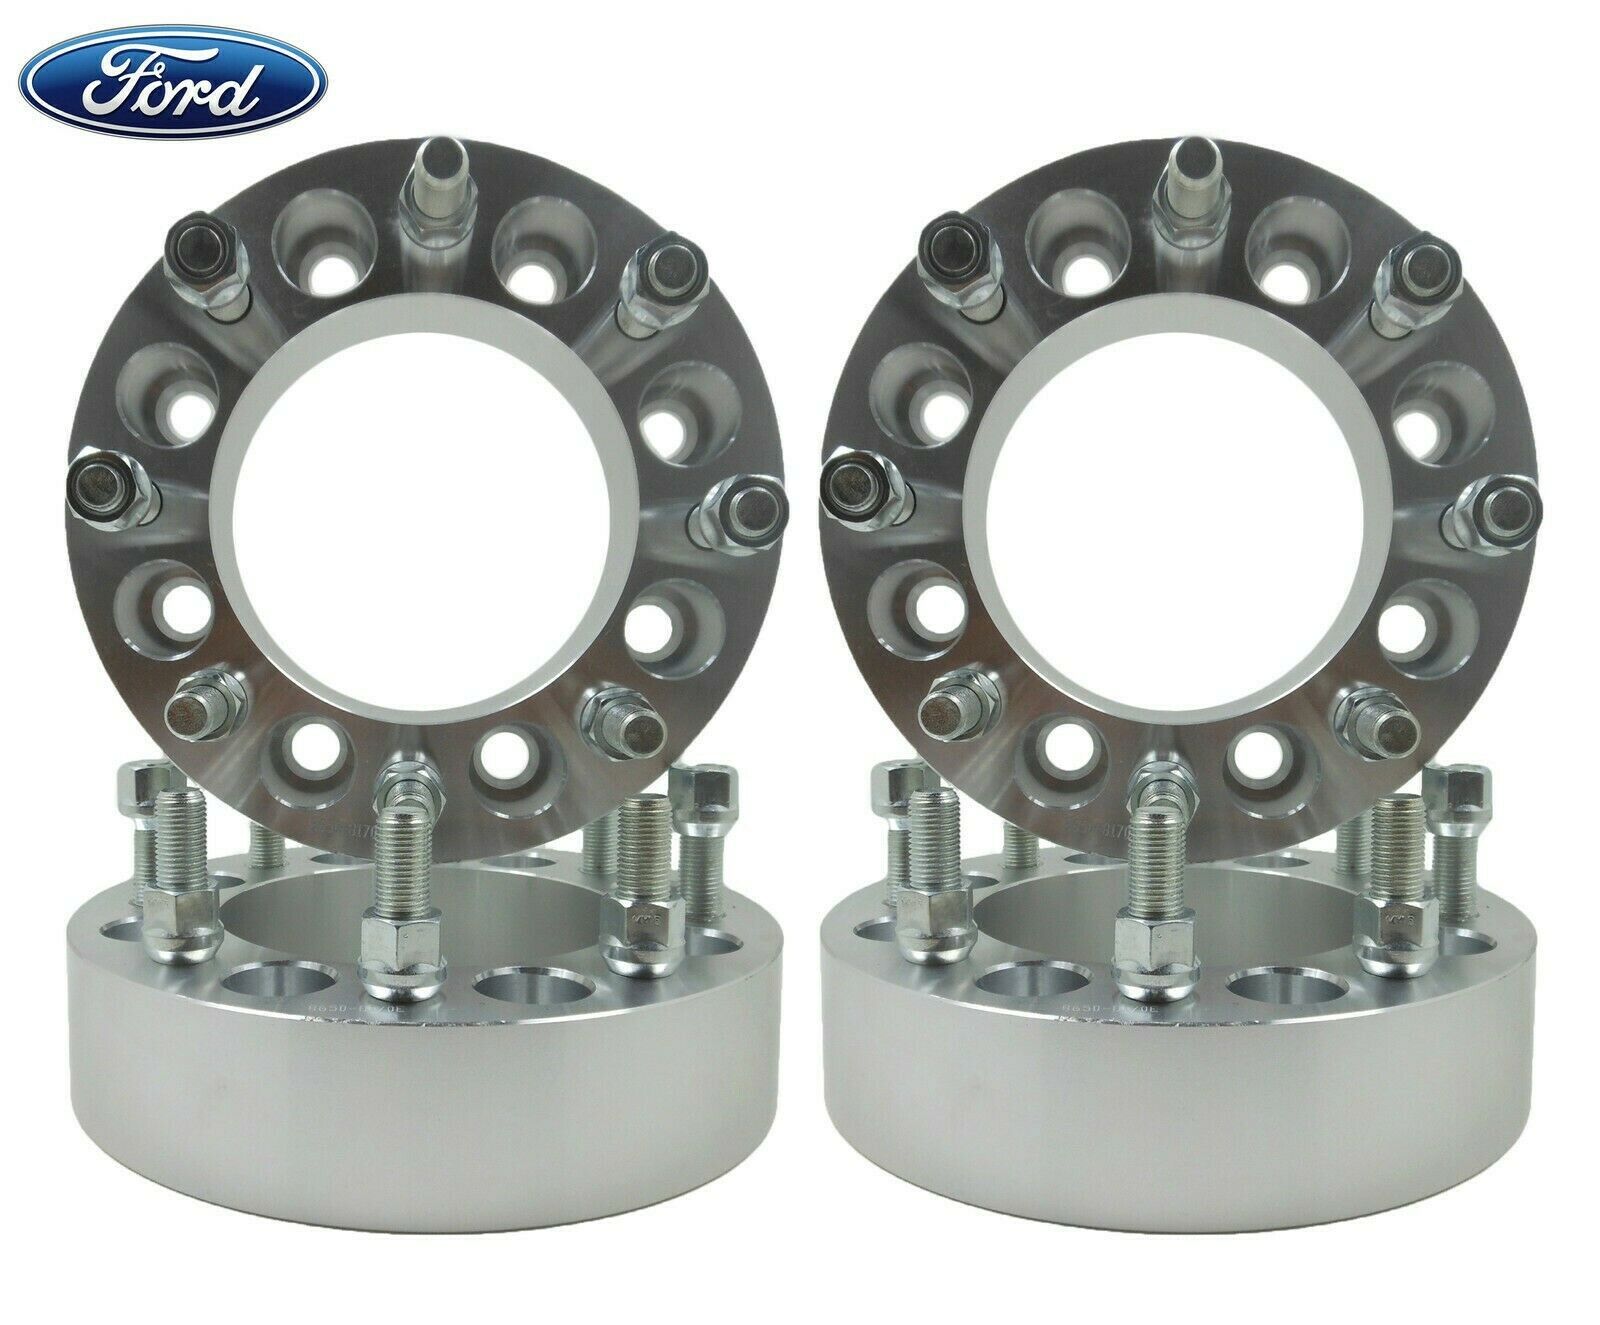 Ford F250 F350 8x170 Wheel Spacers Adapters 1.5" Heavy Duty Trucks Made In Usa